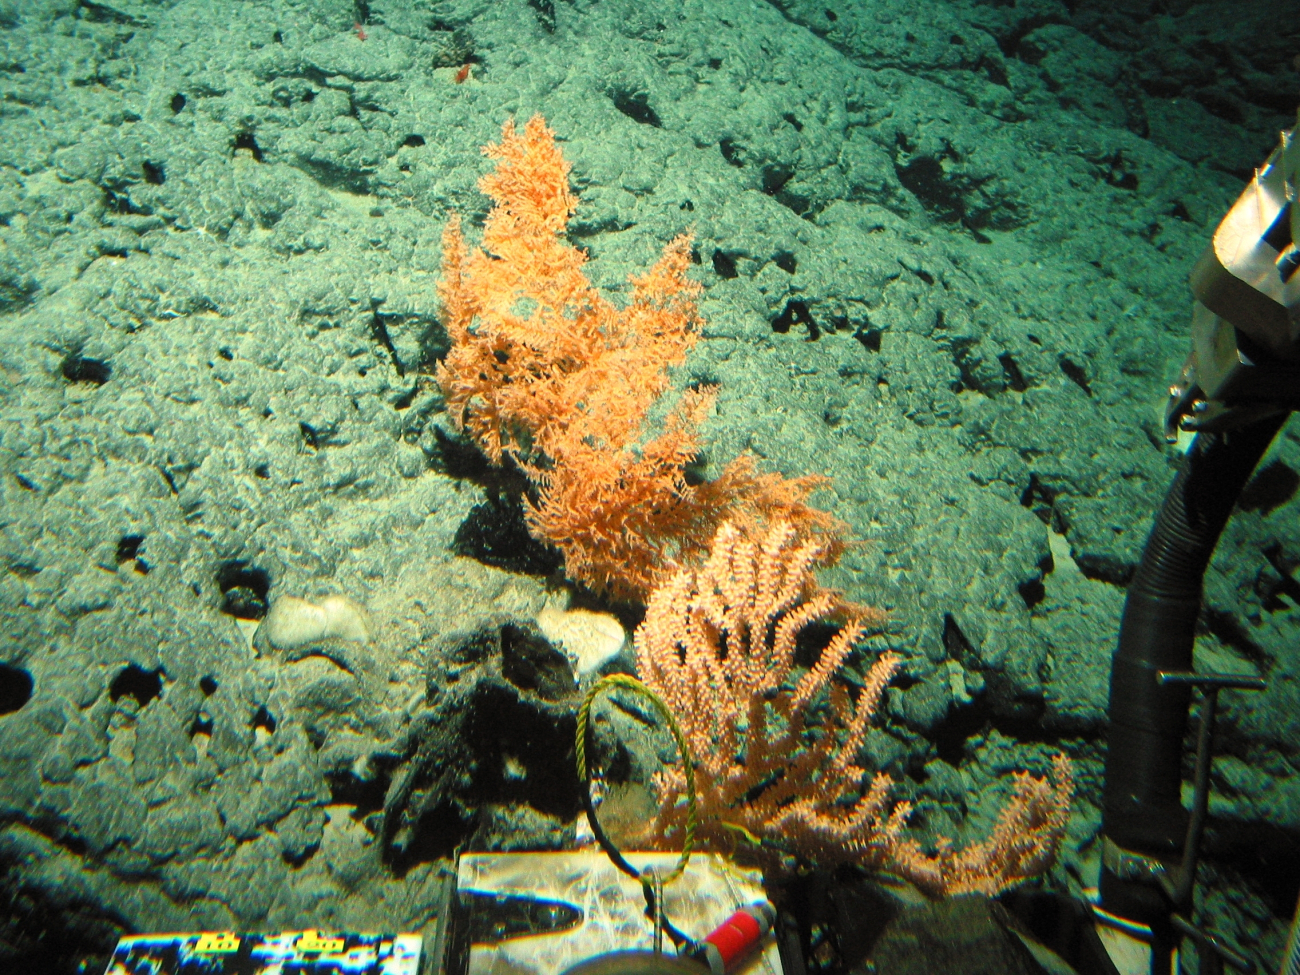 A bamboo coral in the foreground, a black coral bush with orange polyps, and a large black sponge to the left of both corals